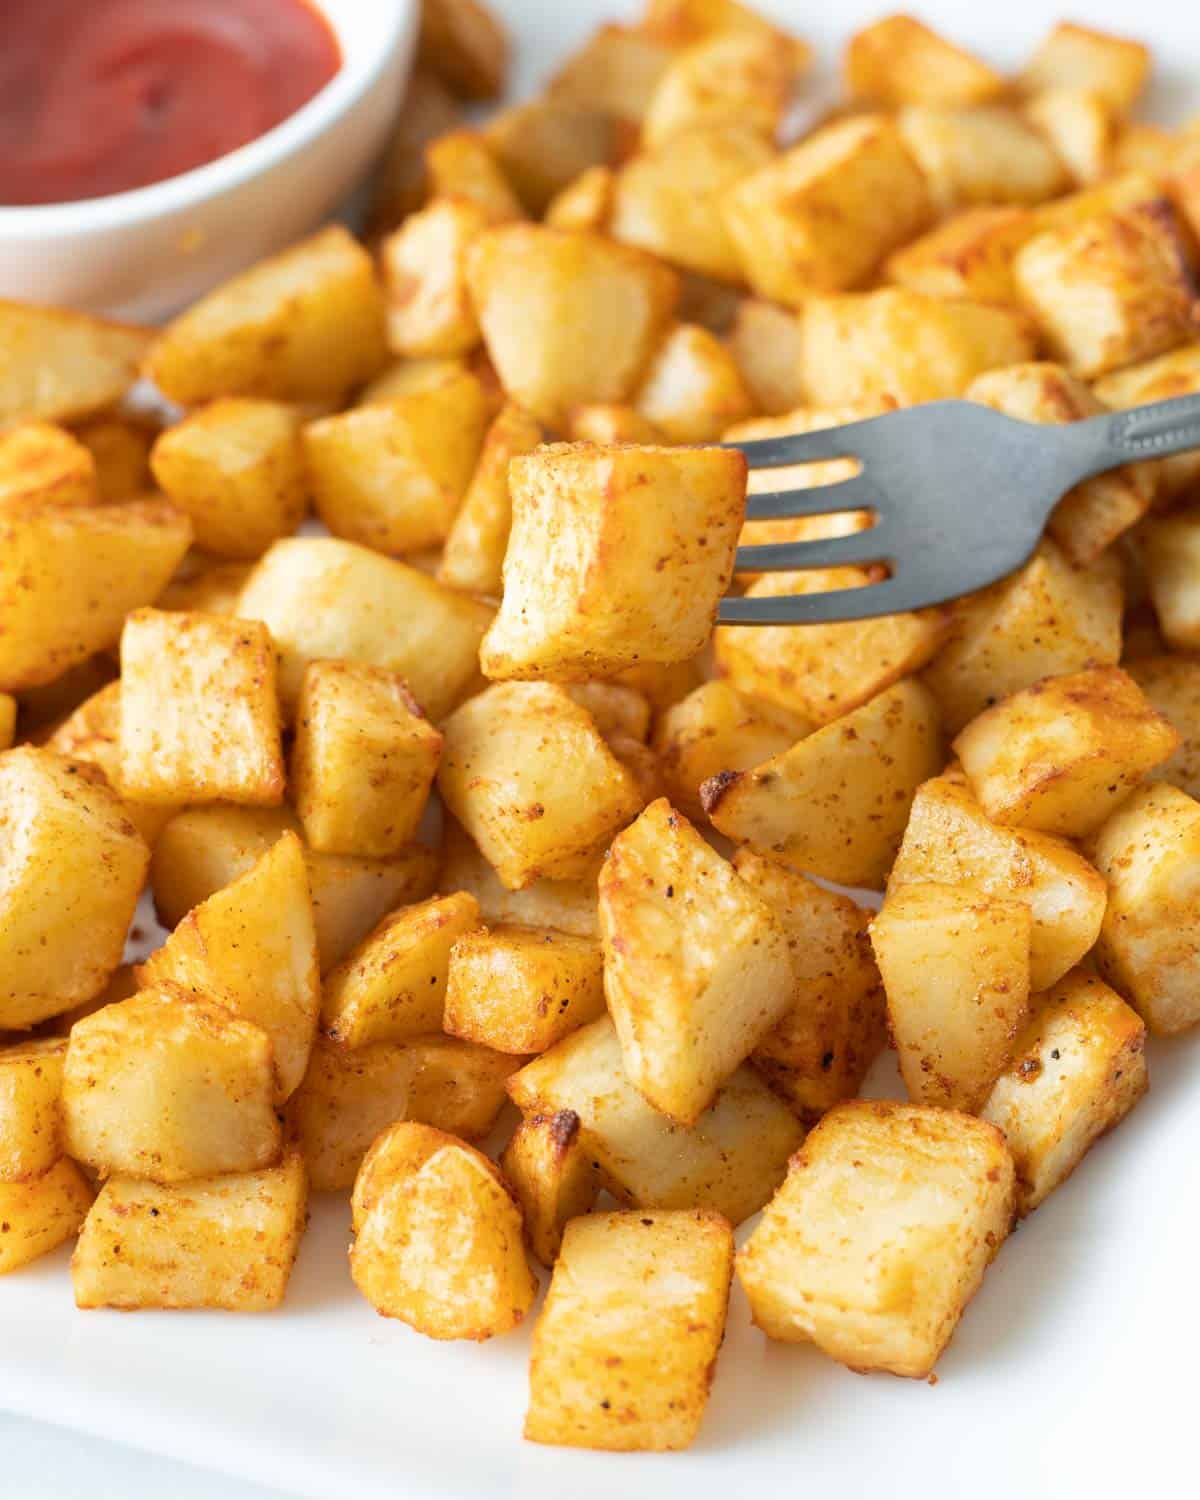 Platter of air fryer home fries, with one bite on a fork.
